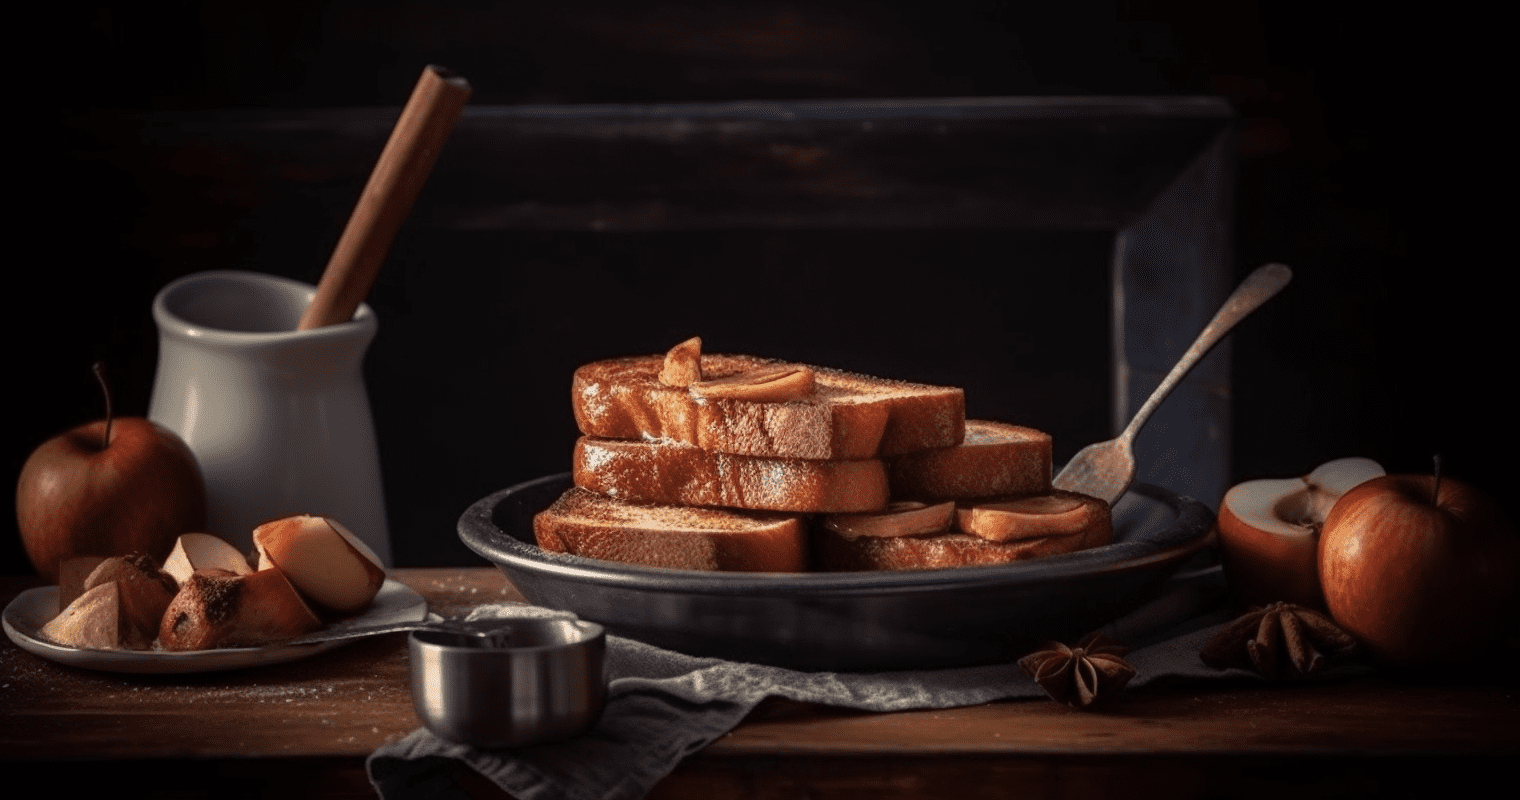 Apple Cinnamon French Toast Cooking Instructions